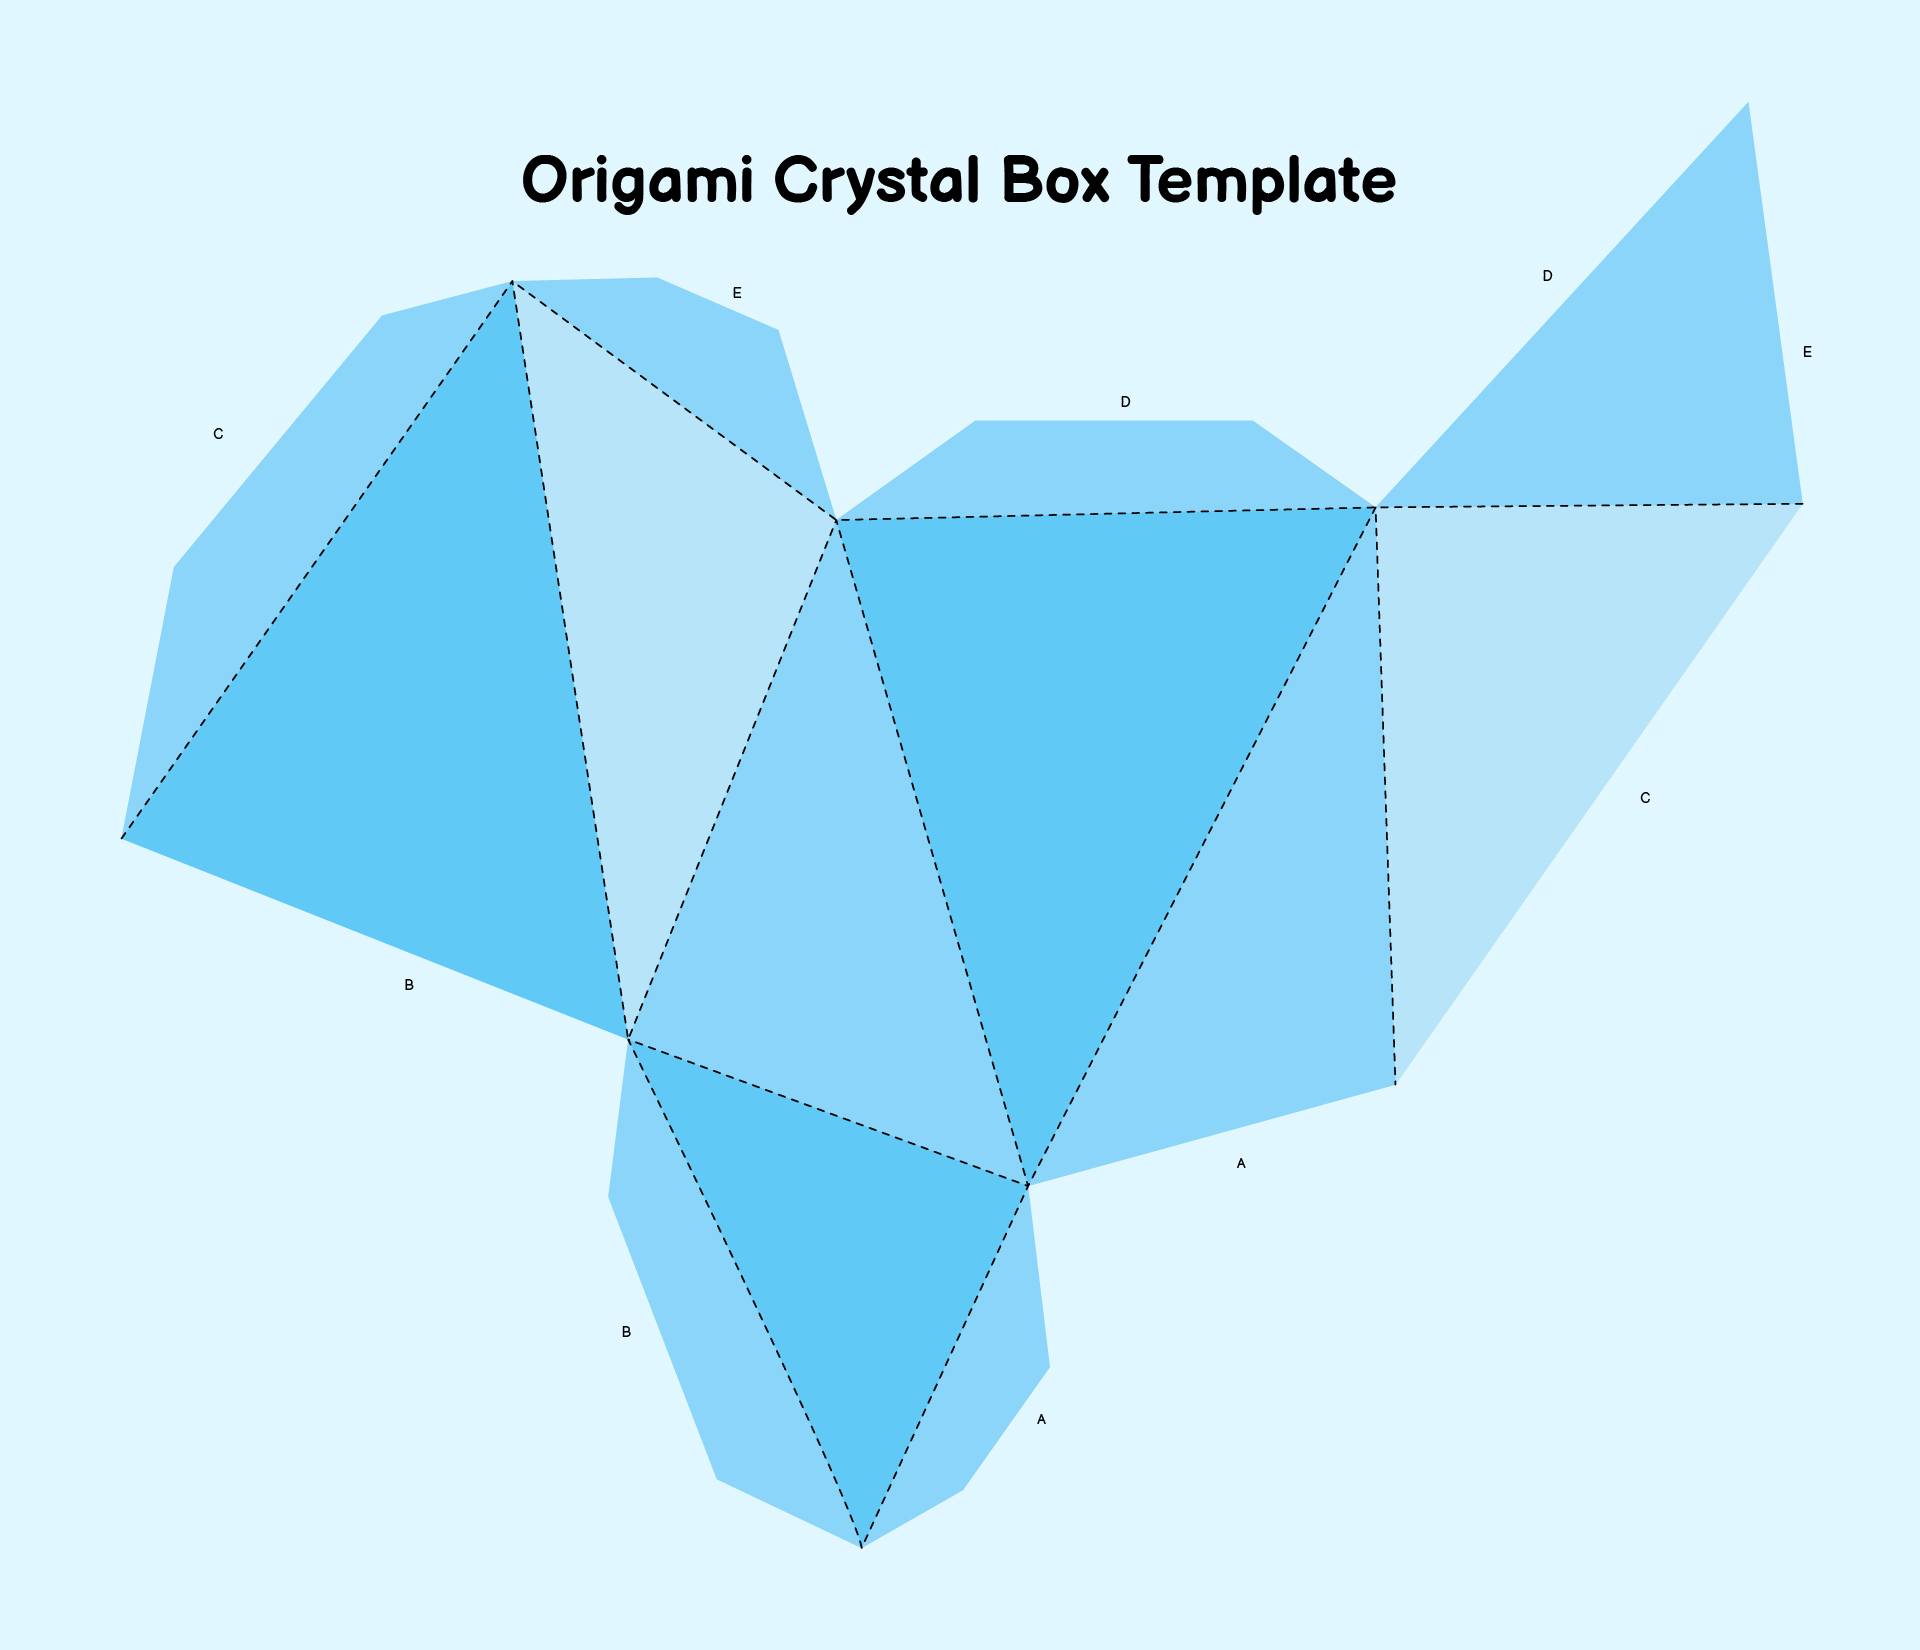 Origami Crystal Box Template